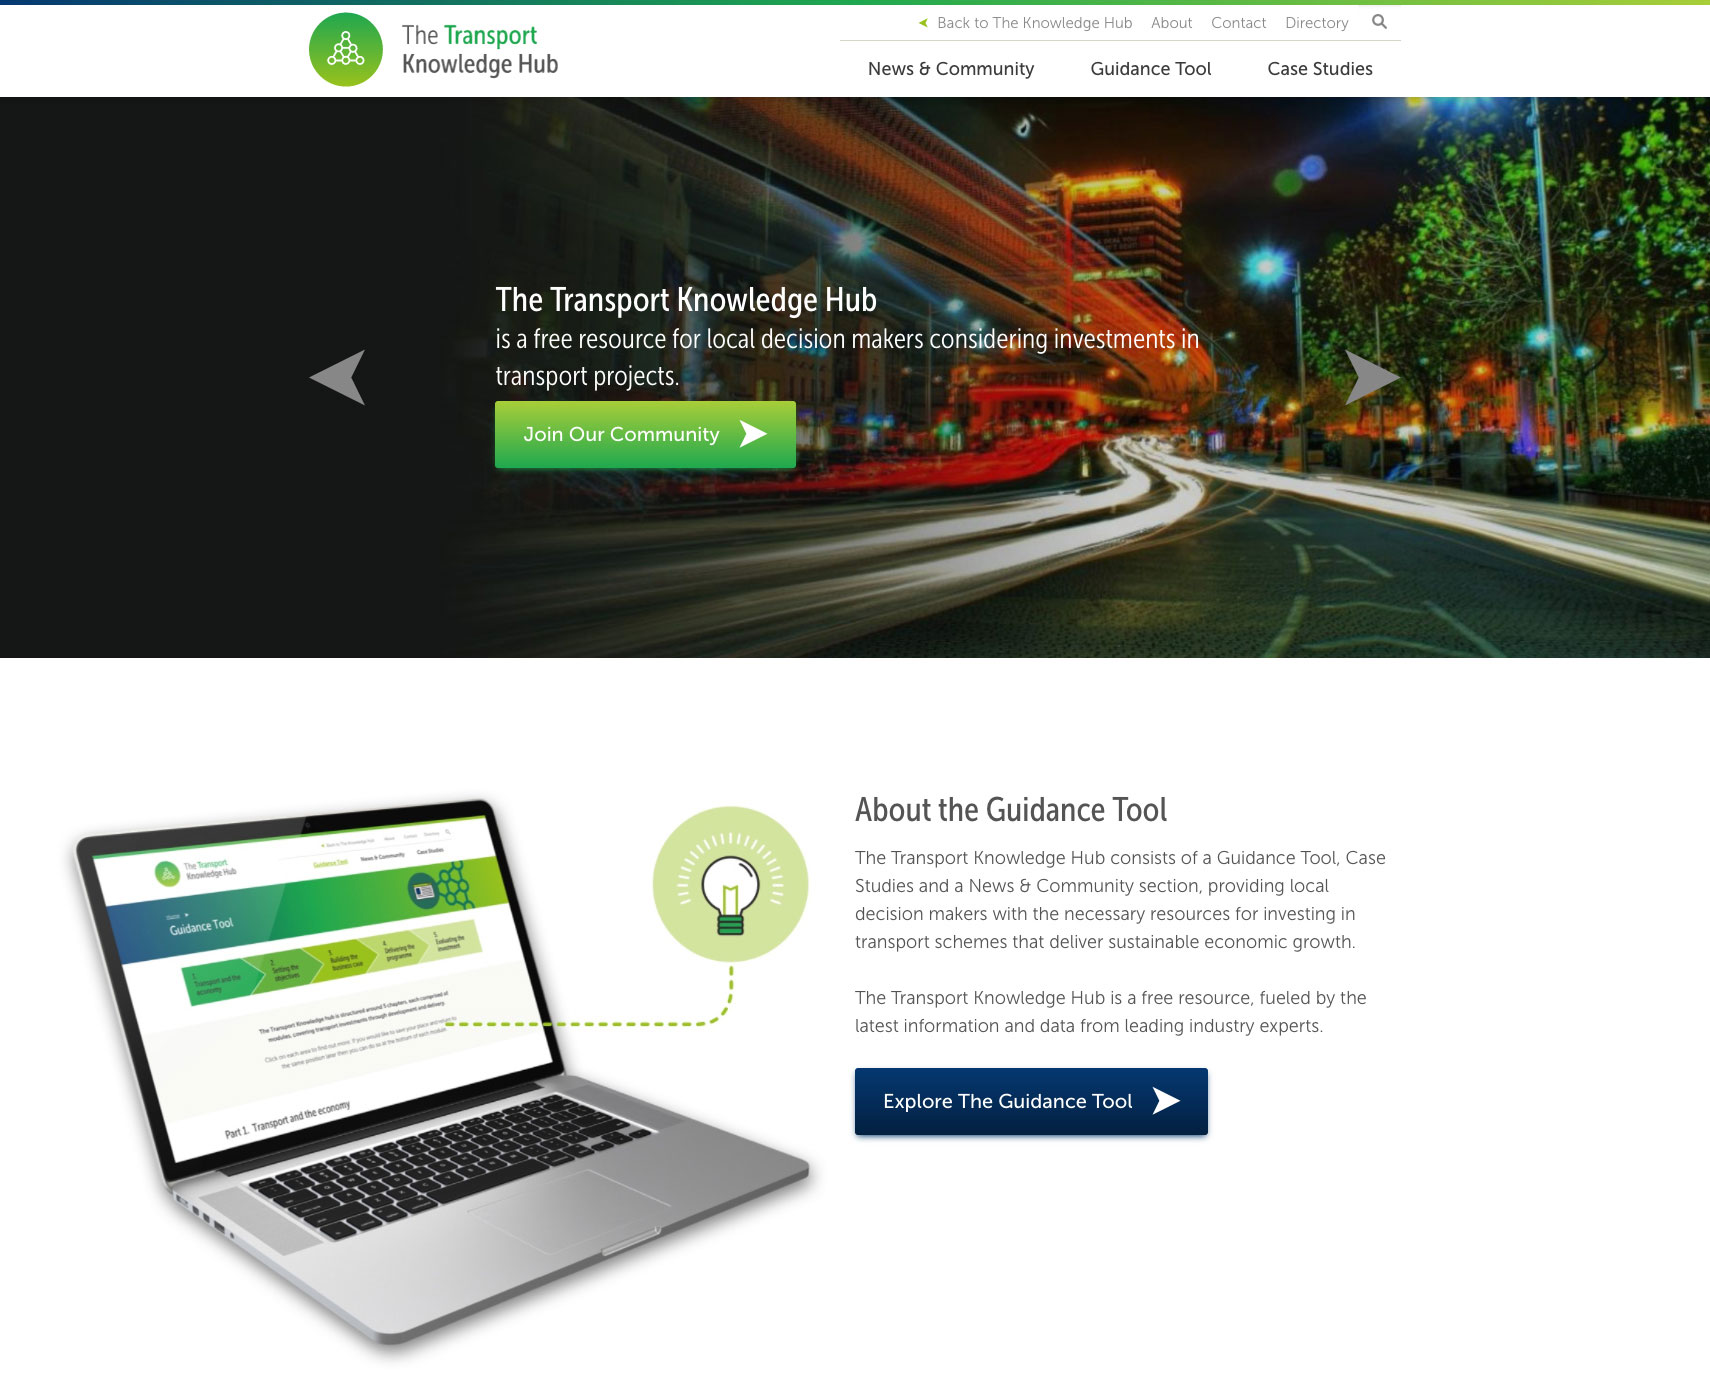 Transport Knowledge Hub Home Page